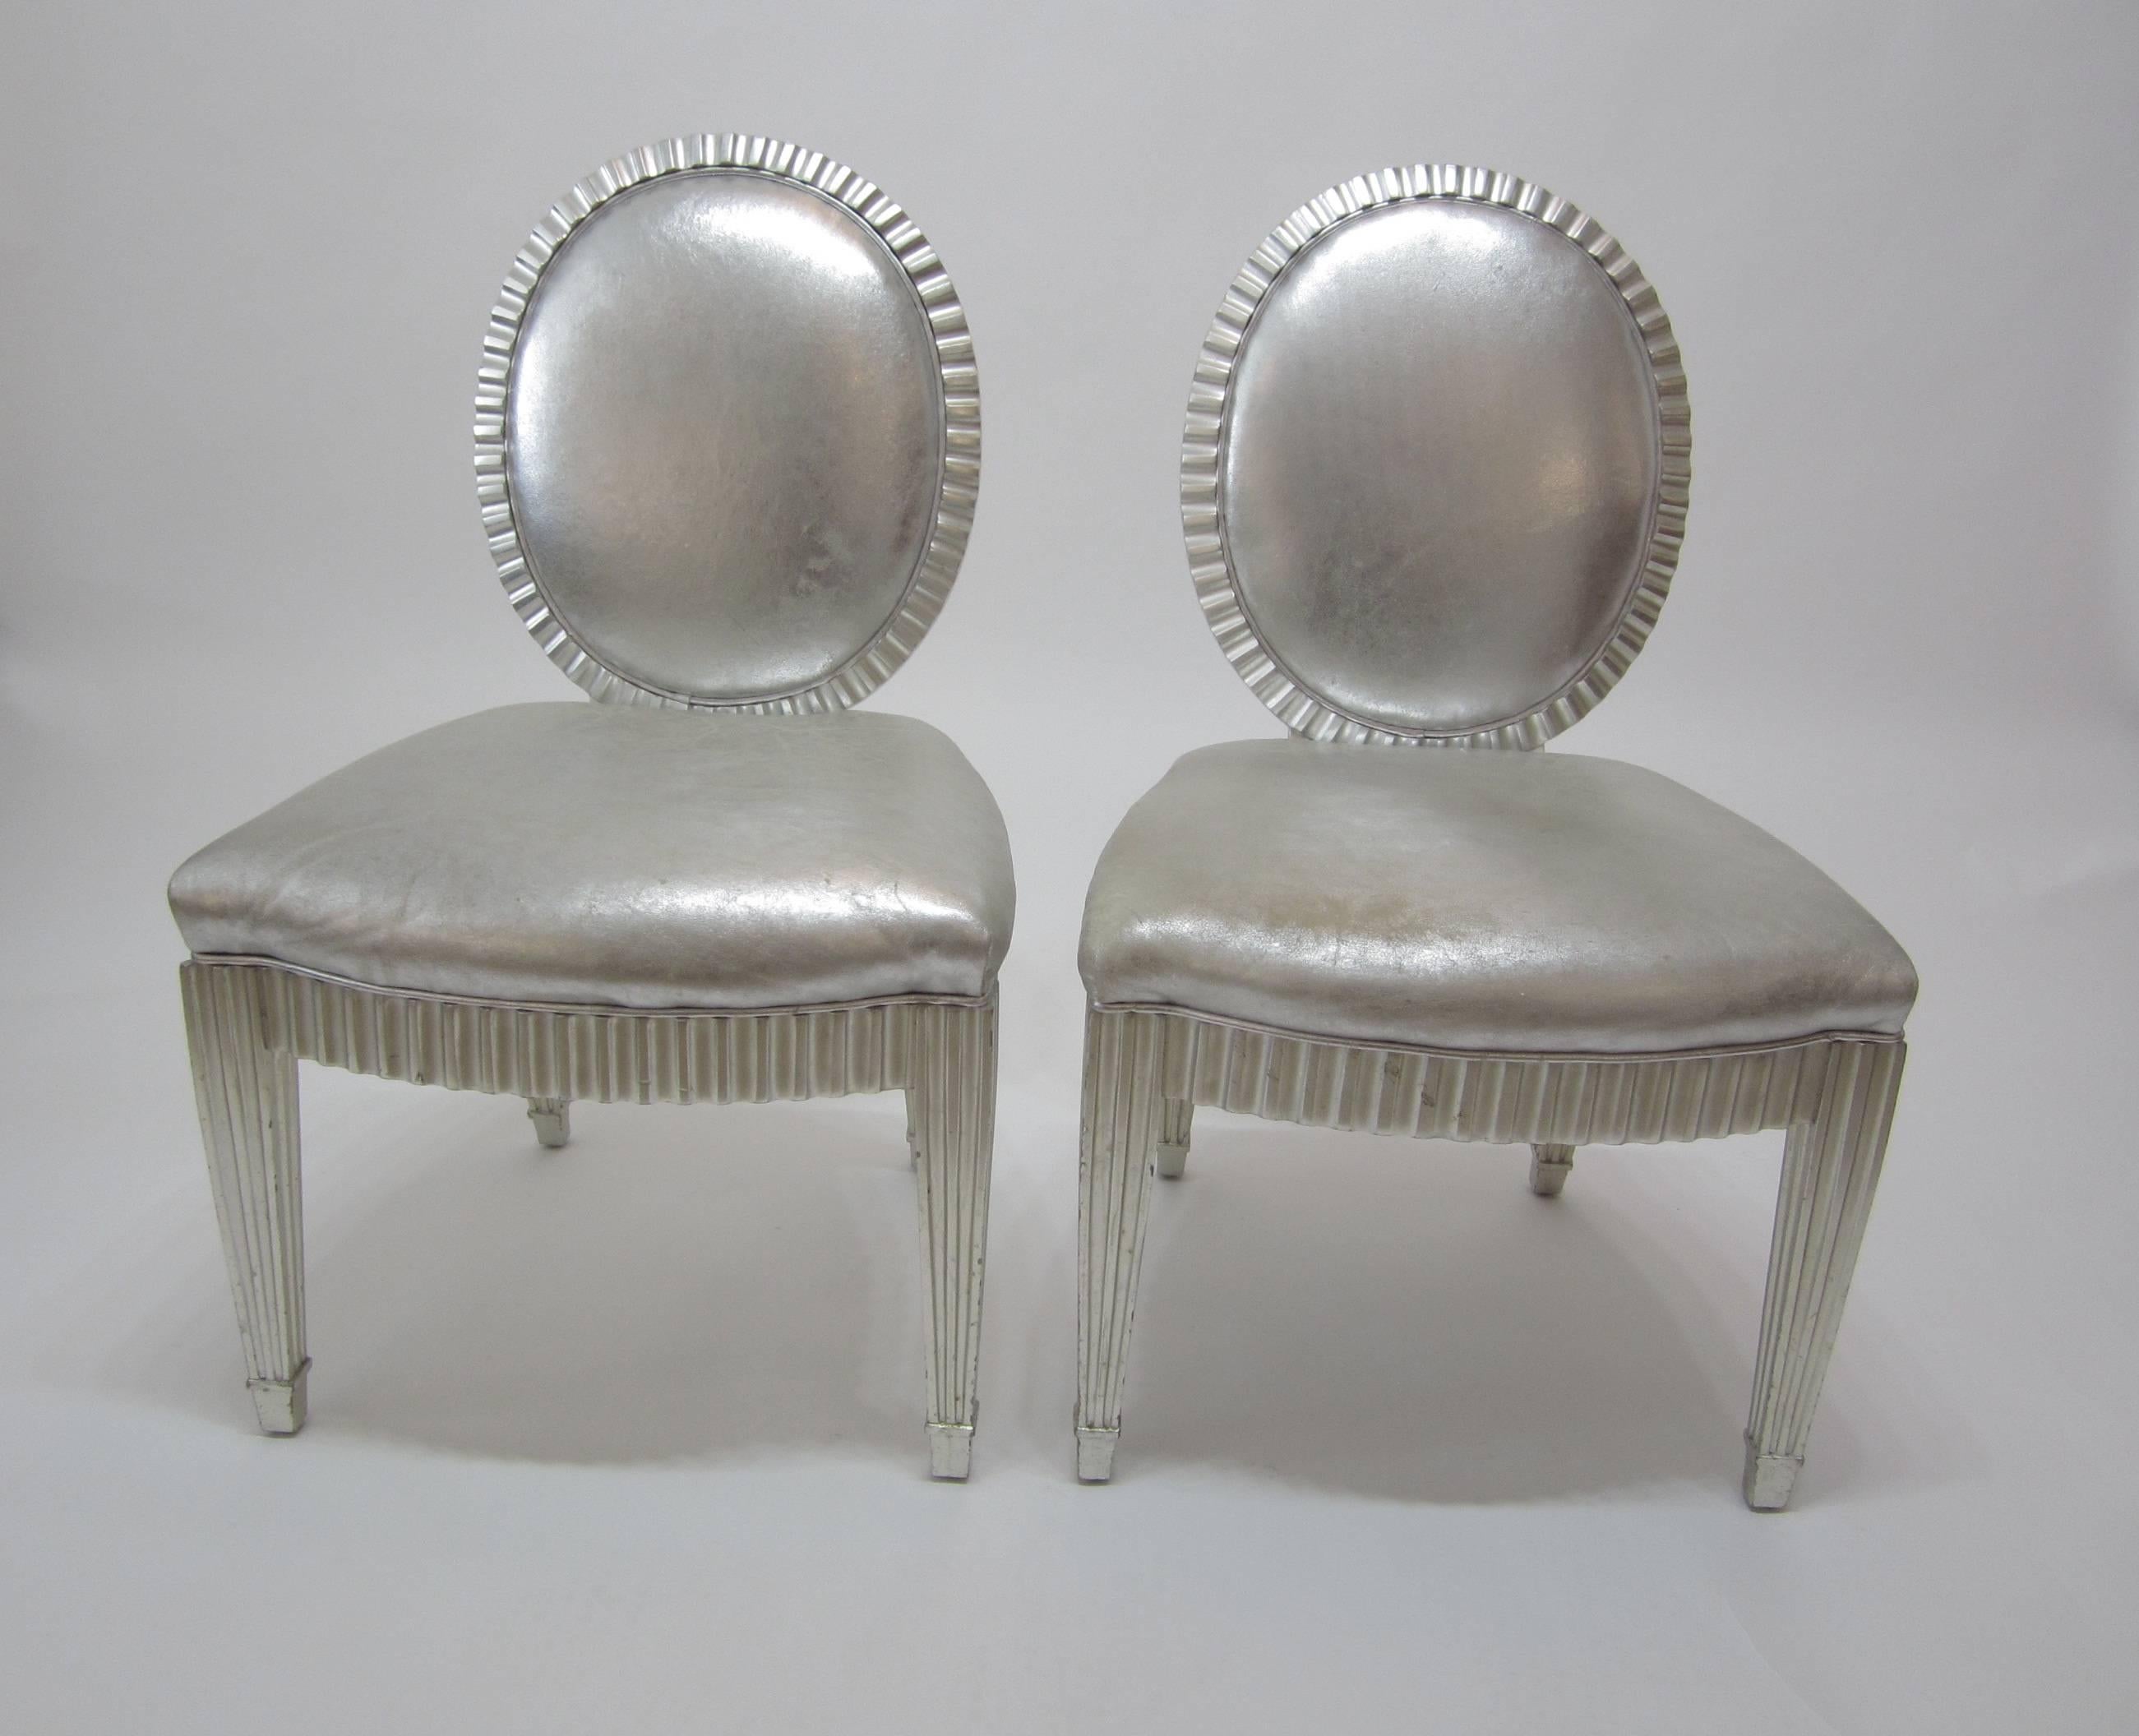 Designed by John Hutton for Donghia, these neoclassical style wood-frame side chairs are silver leafed and have been covered in silver leather metallic. Even after use with minimal but visible wear, these chairs stand out due to their unique yet